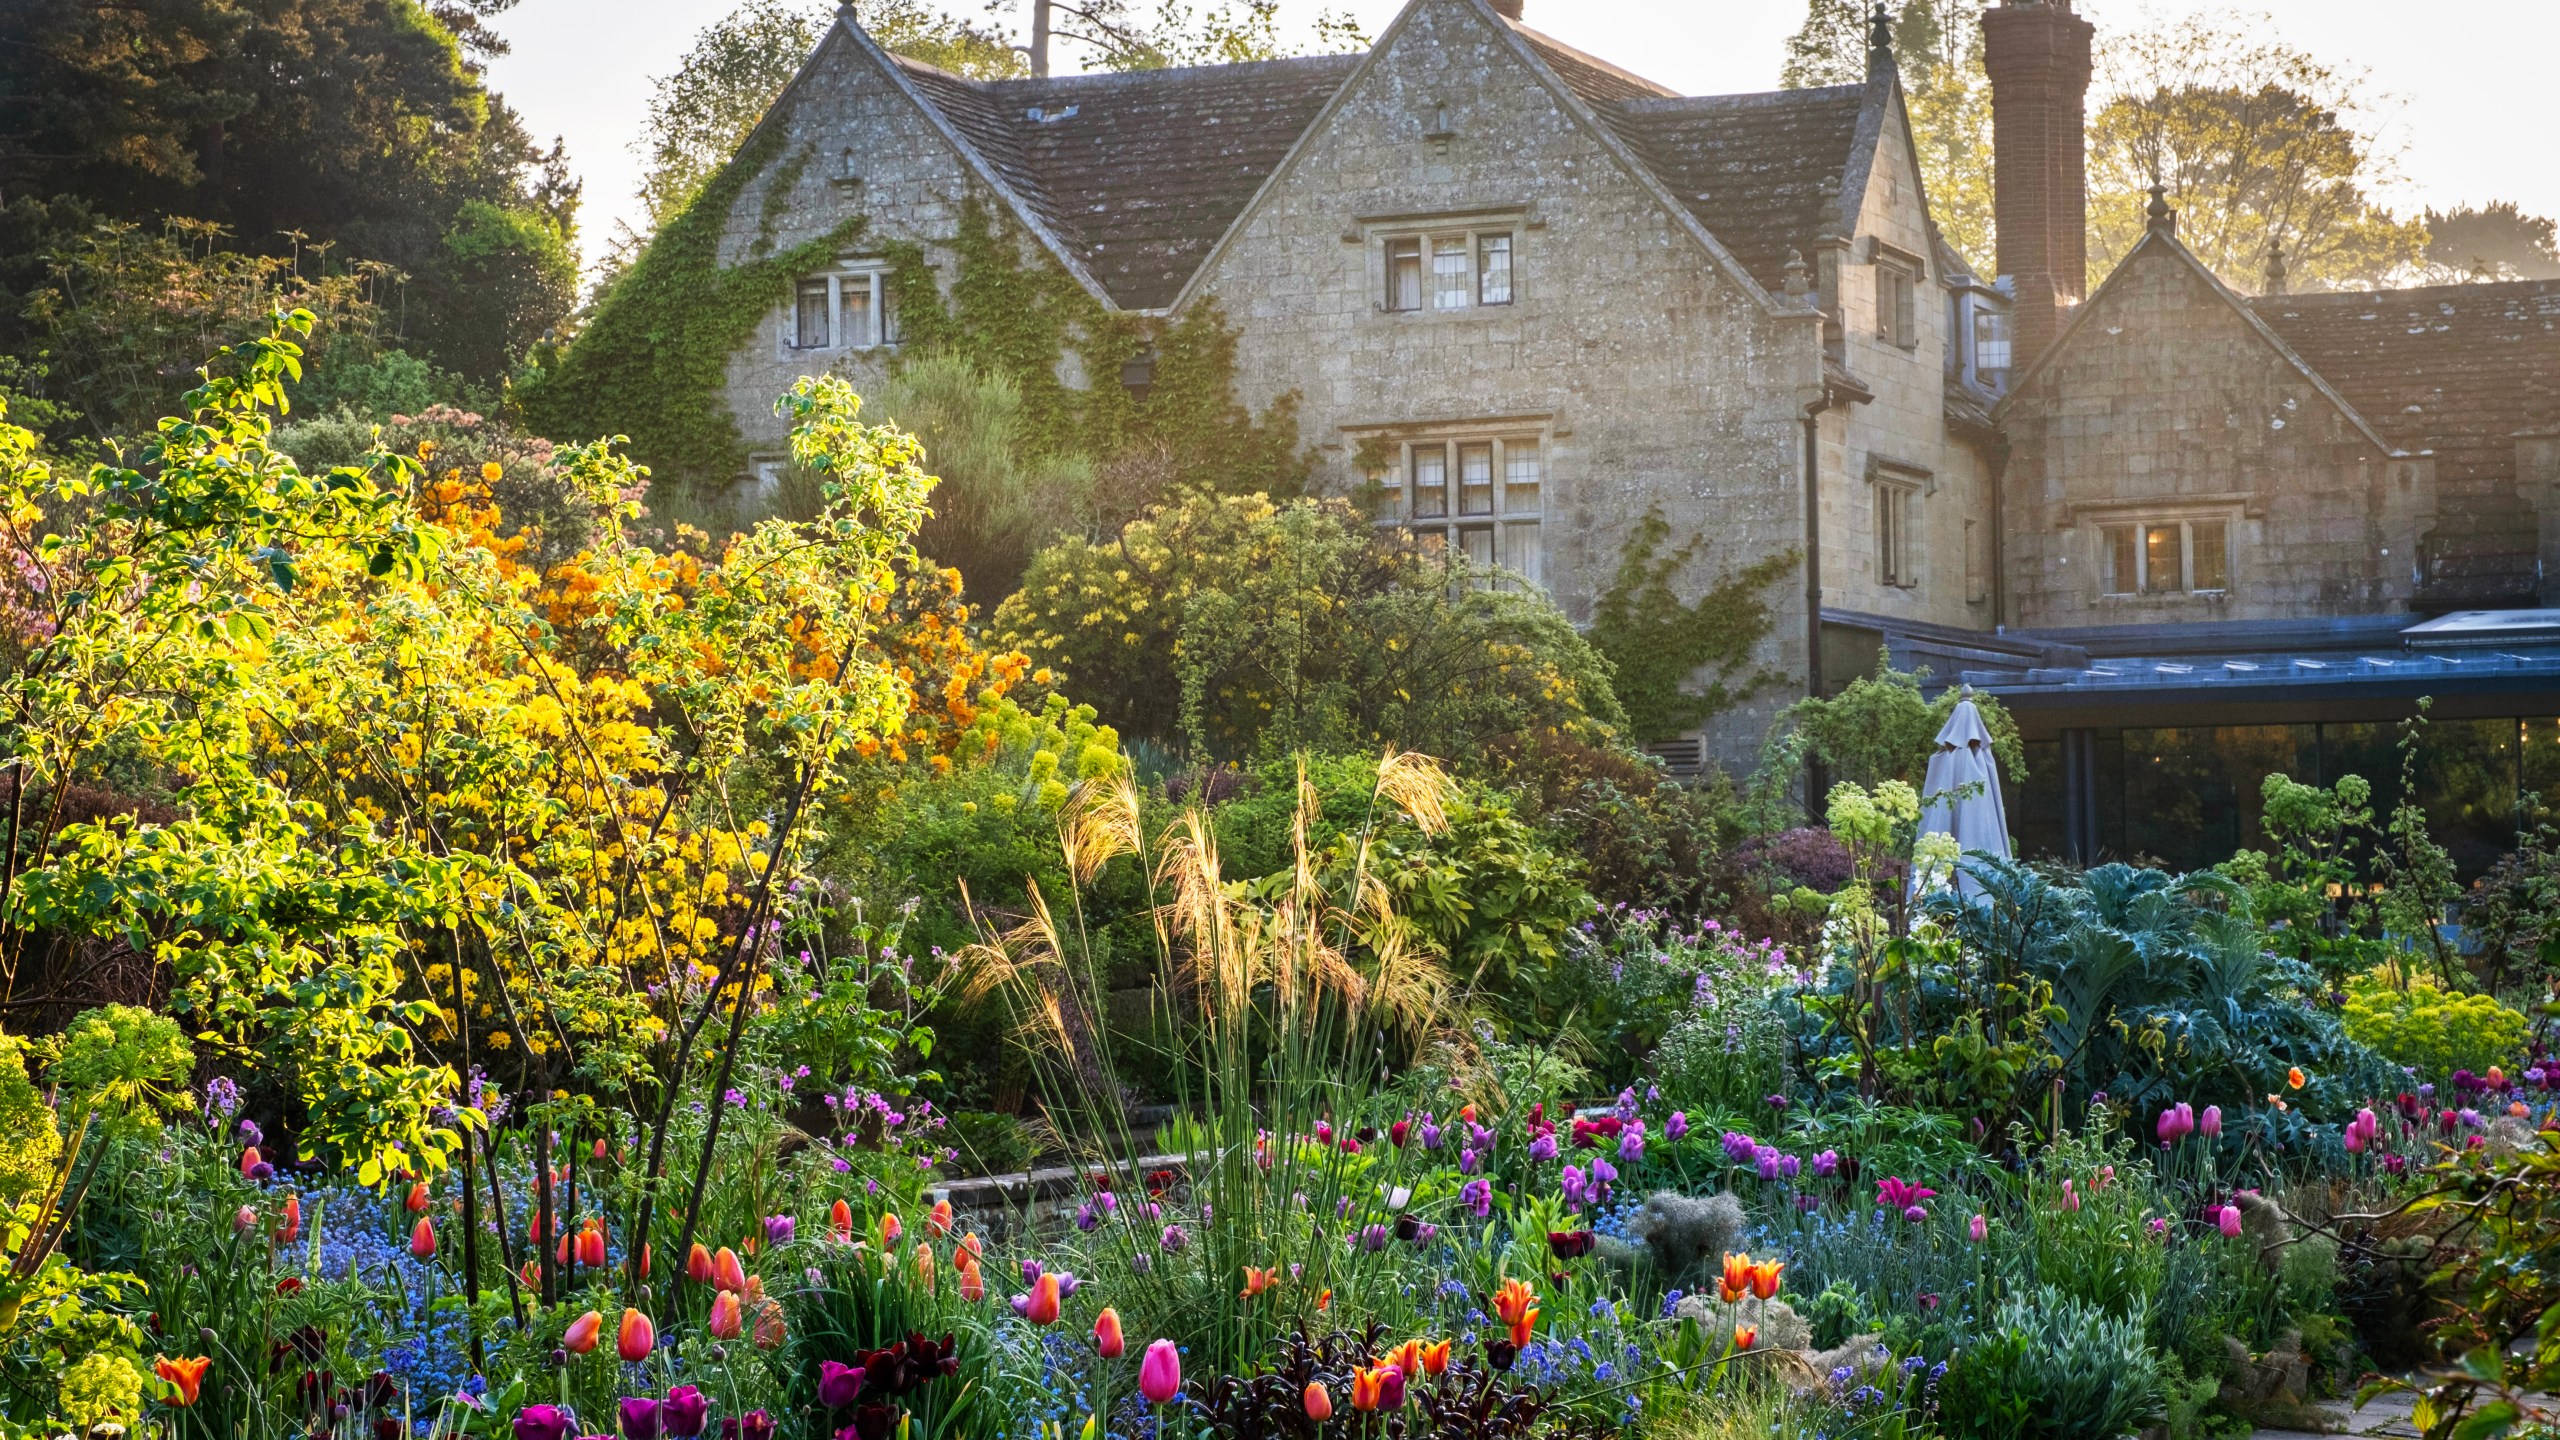 The magnificent grounds include a kitchen garden, orchards and a flower meadow